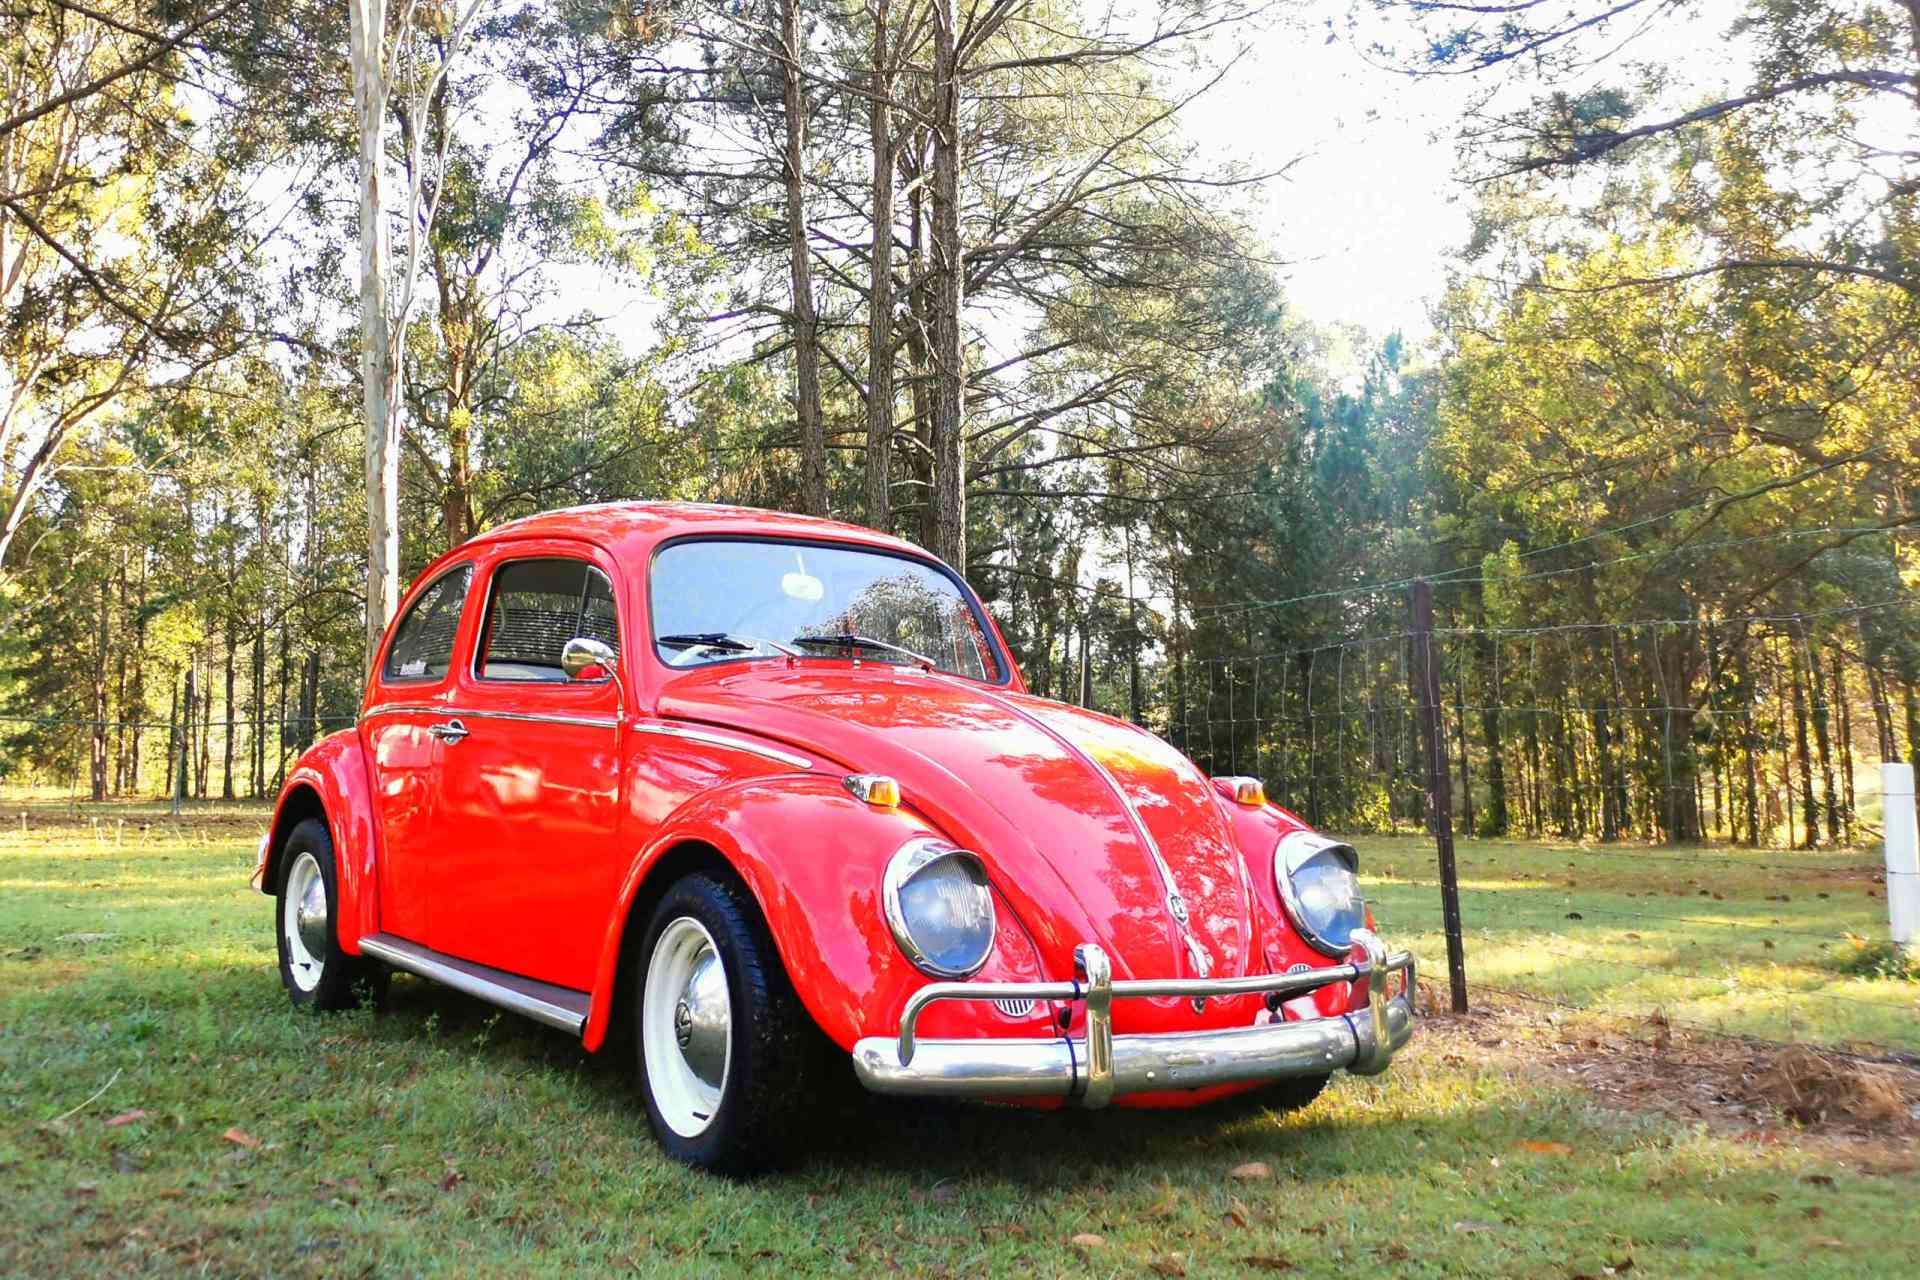 The shiny red electric 1964 VW Beetle